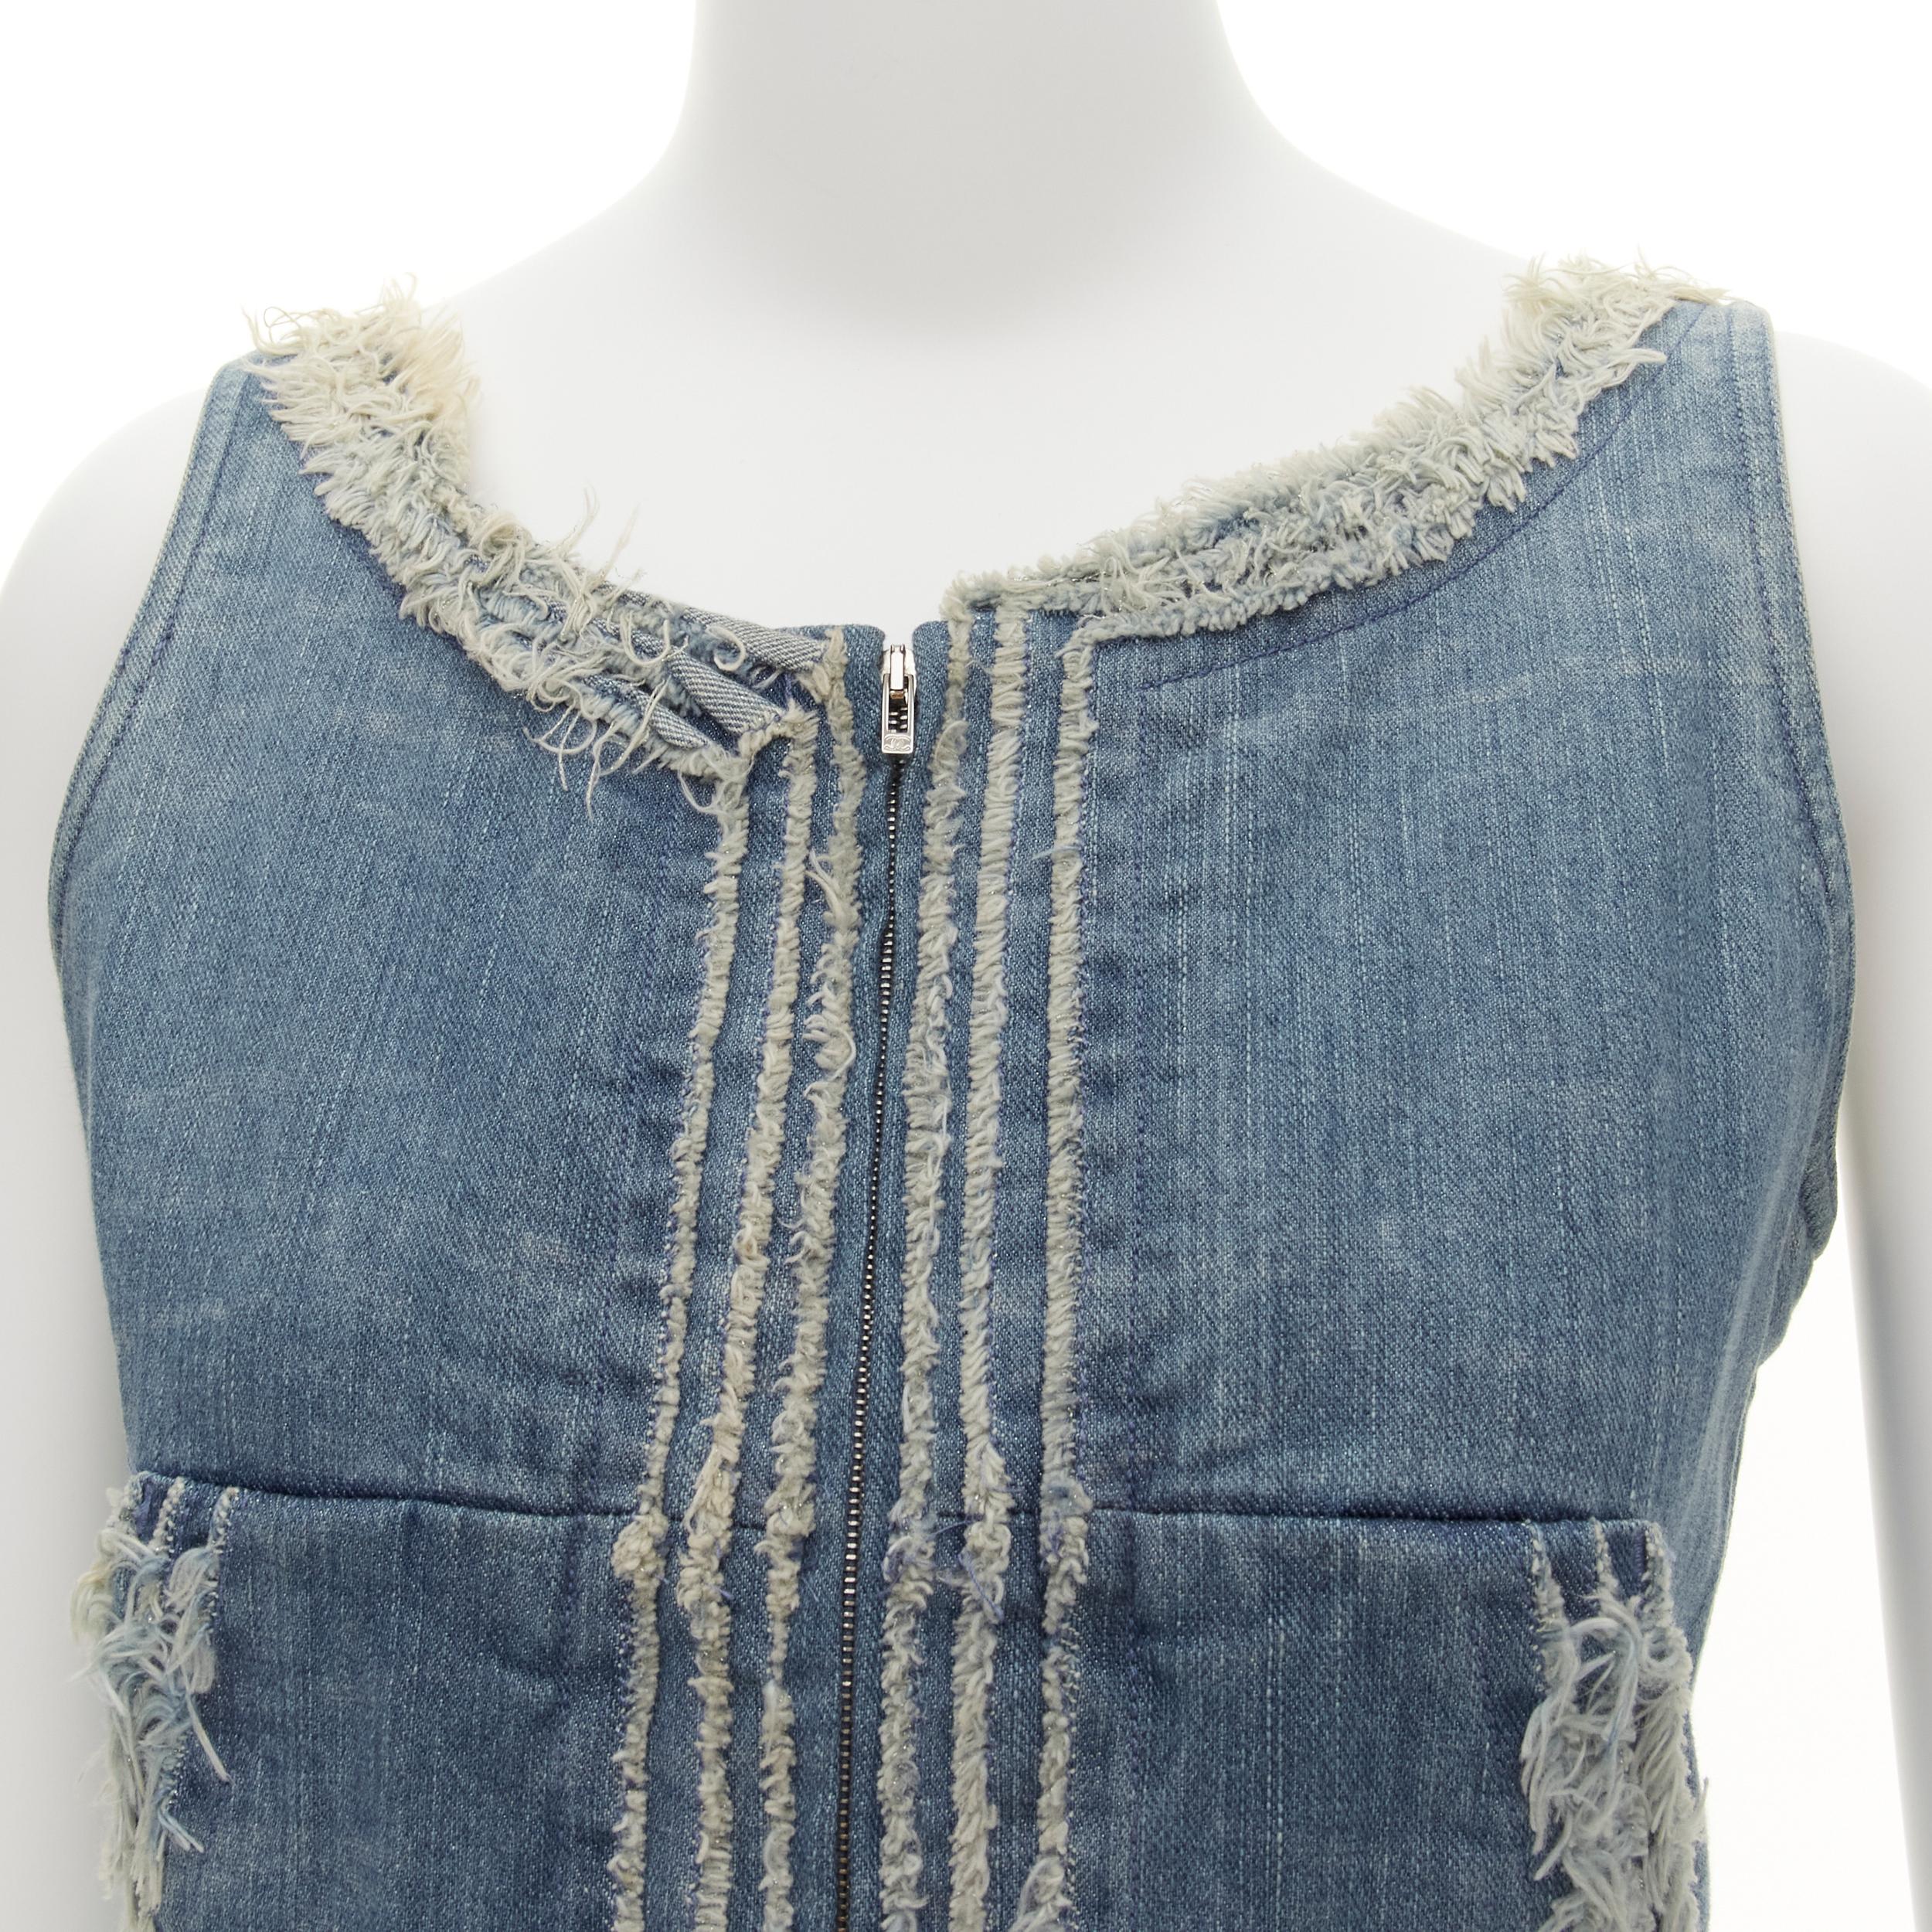 CHANEL 08A Carousel Runway blue distressed denim pocketed zip front dress FR36 S
Reference: TGAS/D00024
Brand: Chanel
Designer: Karl Lagerfeld
Collection: 08A - Runway
Material: Cotton, Elastane
Color: Blue
Pattern: Solid
Closure: Zip
Lining: Blue